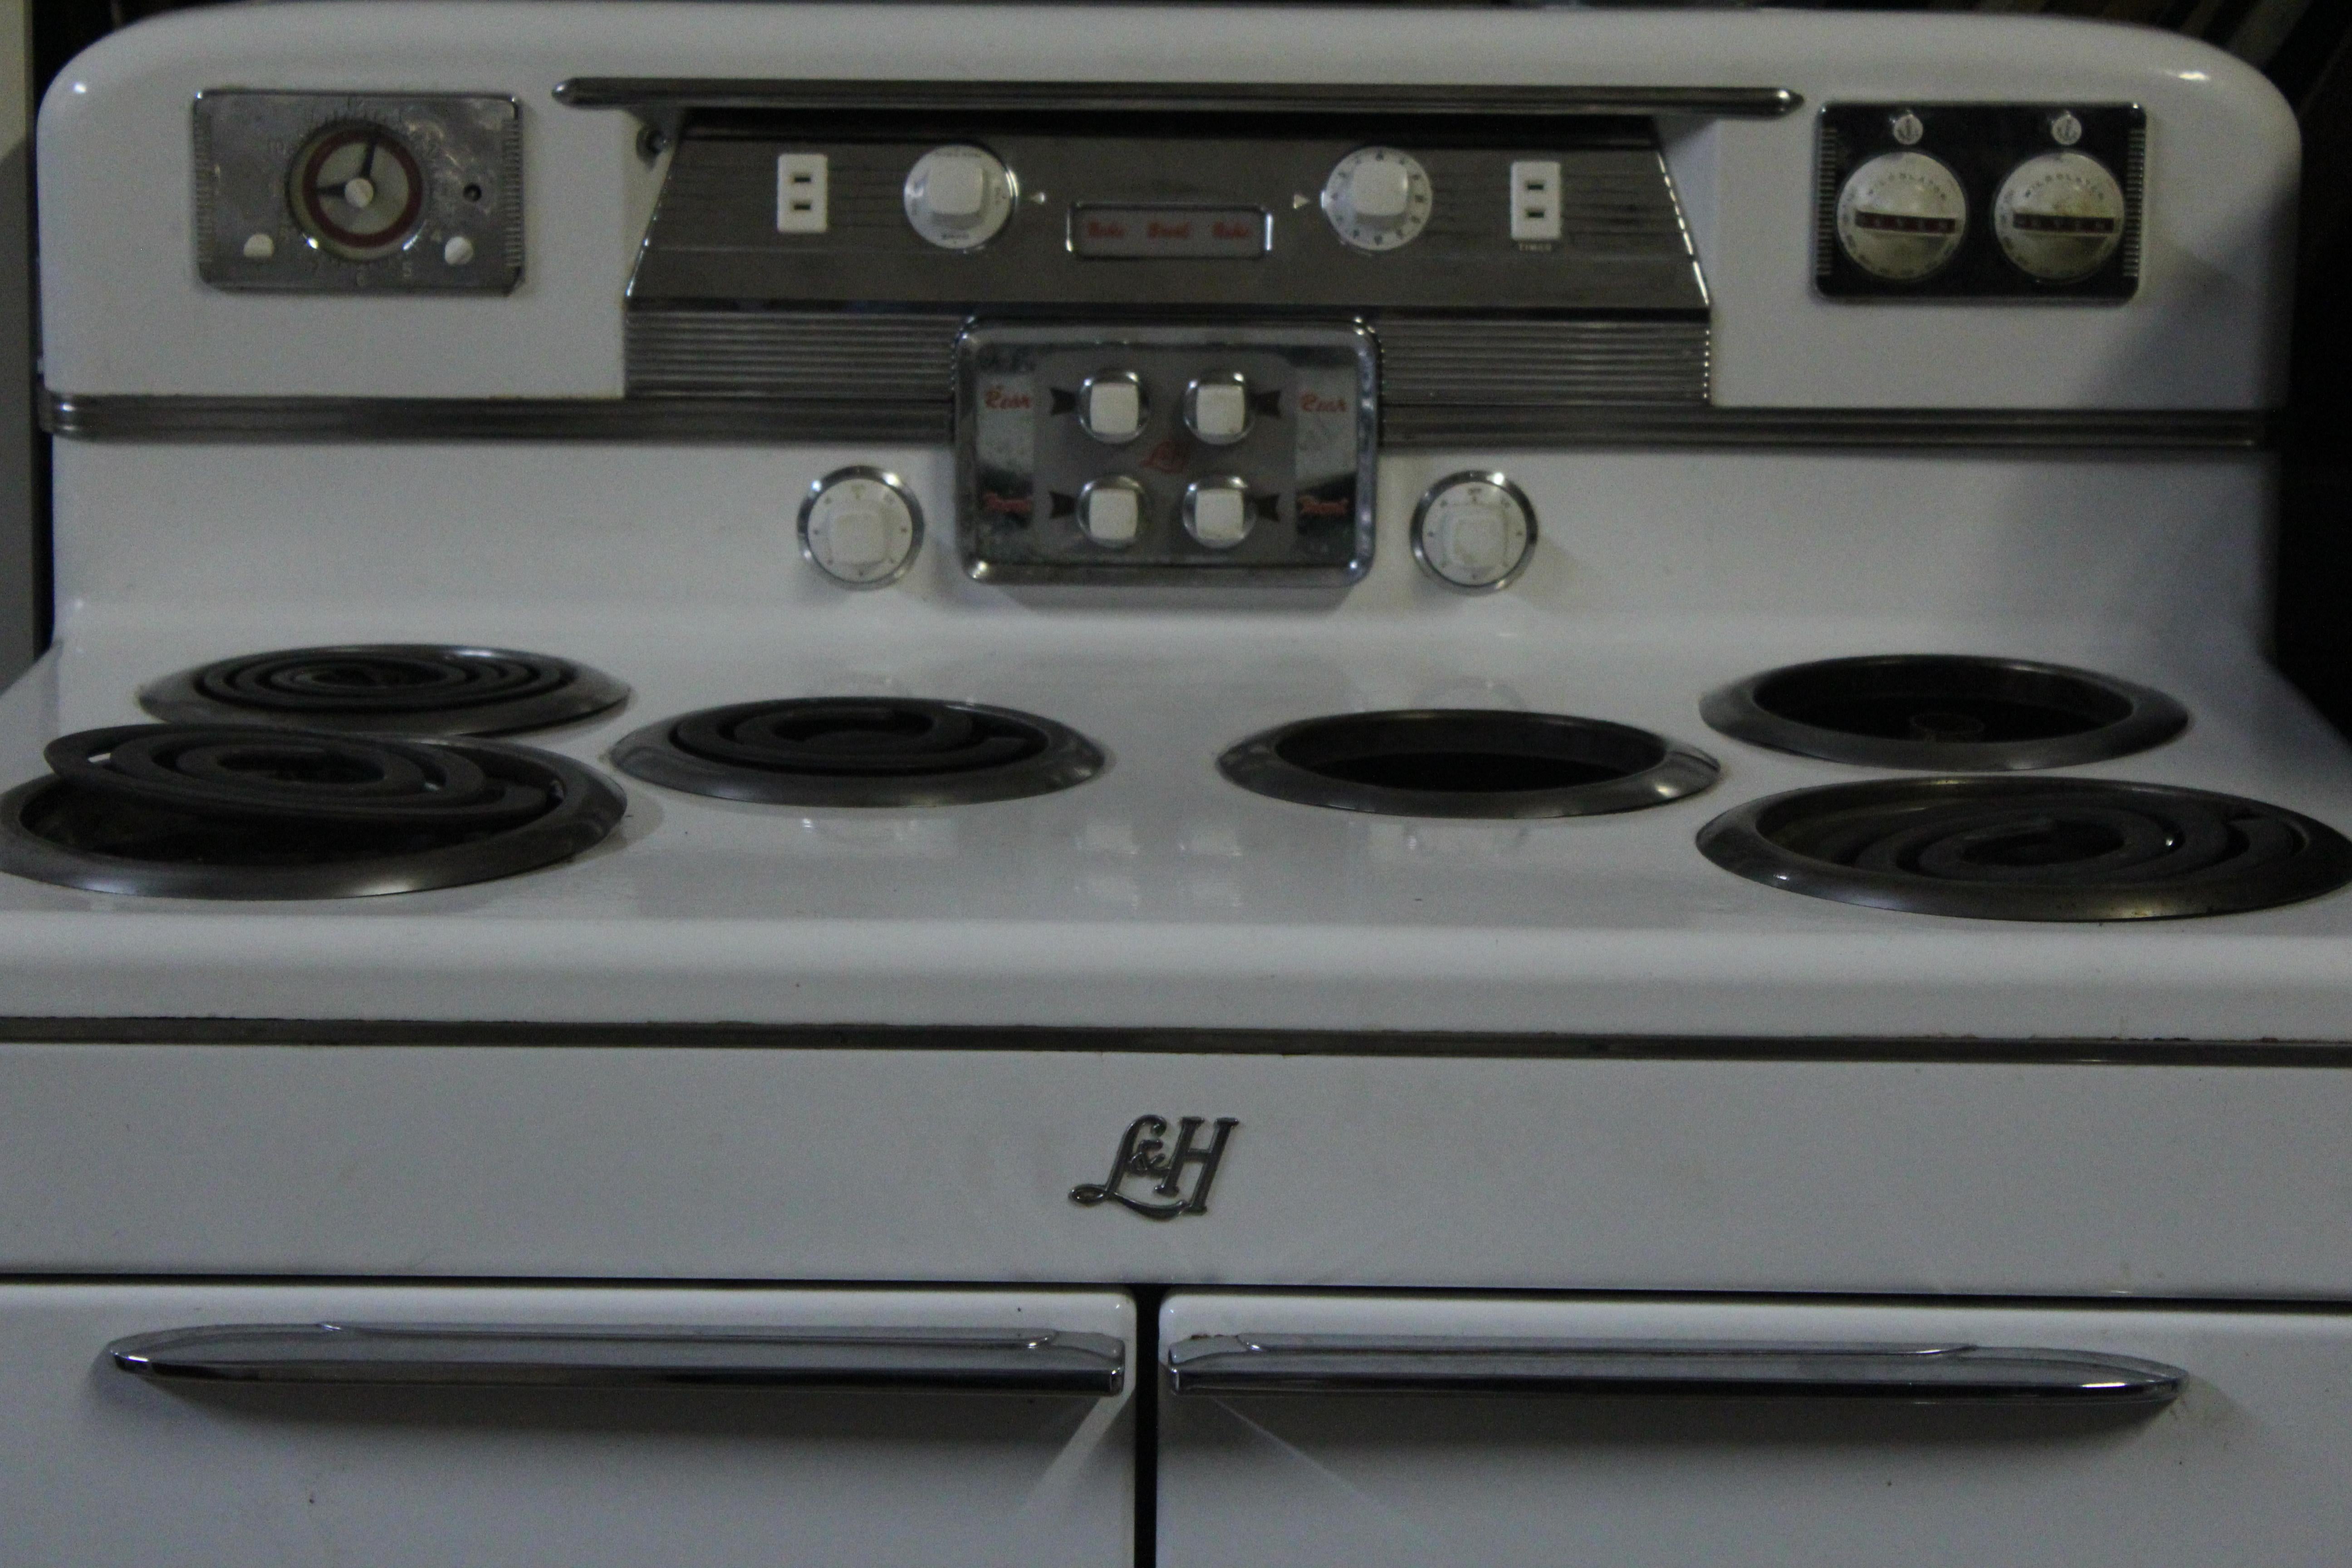 1950s L&H (Lectro-Host) electric 6-burner stove and double oven from A.J. Lindemann & Hoverson Co. (Milwaukee, WI). Includes two broiler drawers, clock/timer and electrical outlet, along with the original manual/recipe booklet.